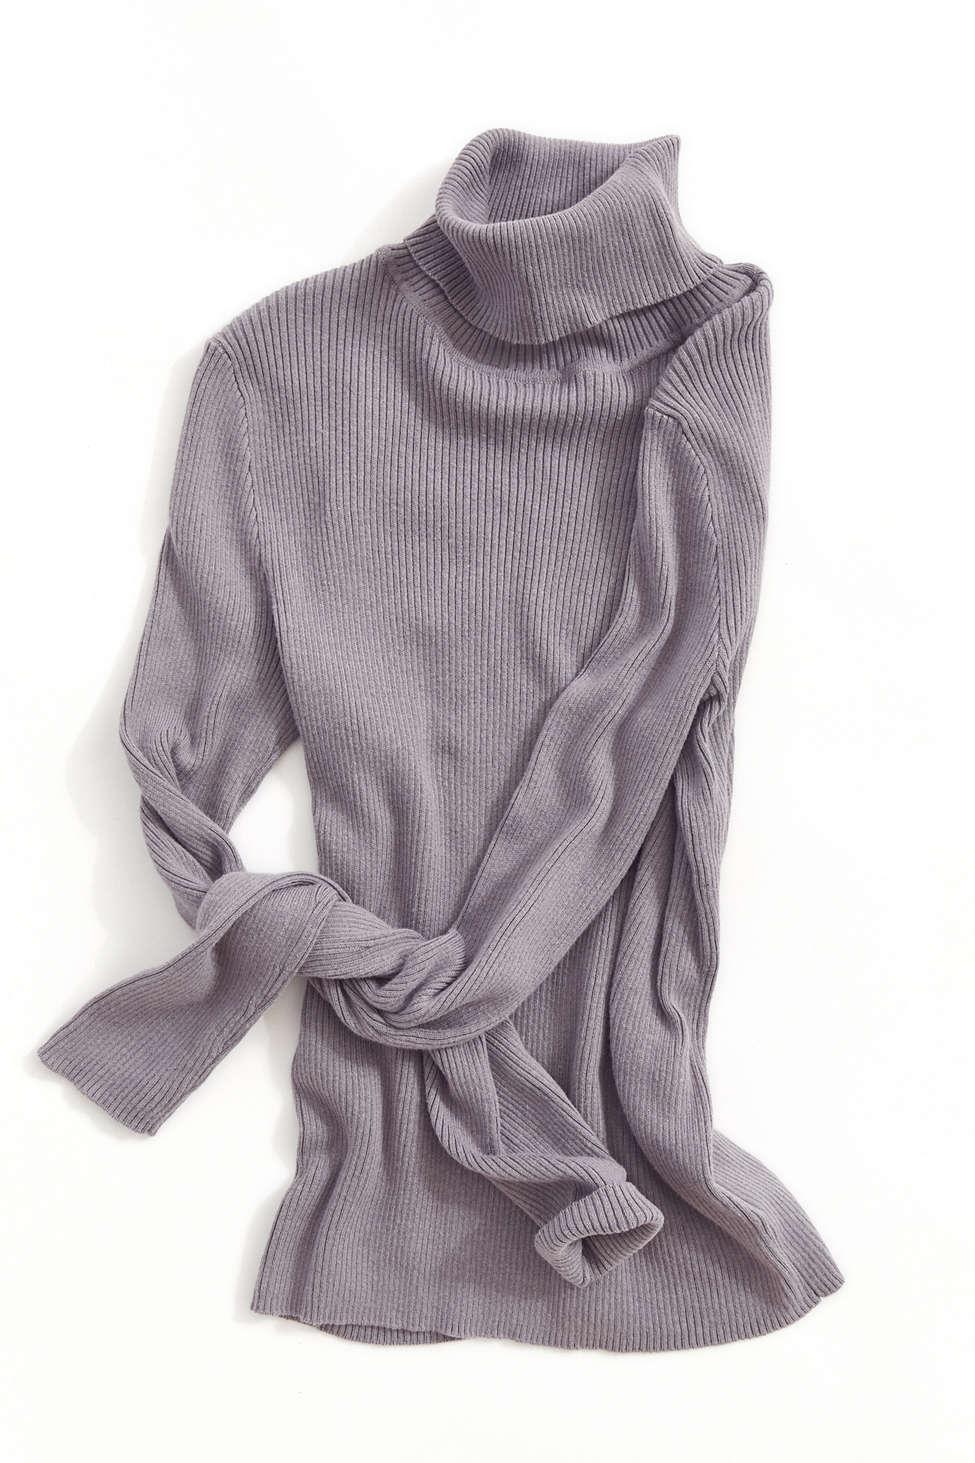 Urban Outfitters Uo Sweet Dreams Turtleneck Sweater in Grey (Gray) - Lyst